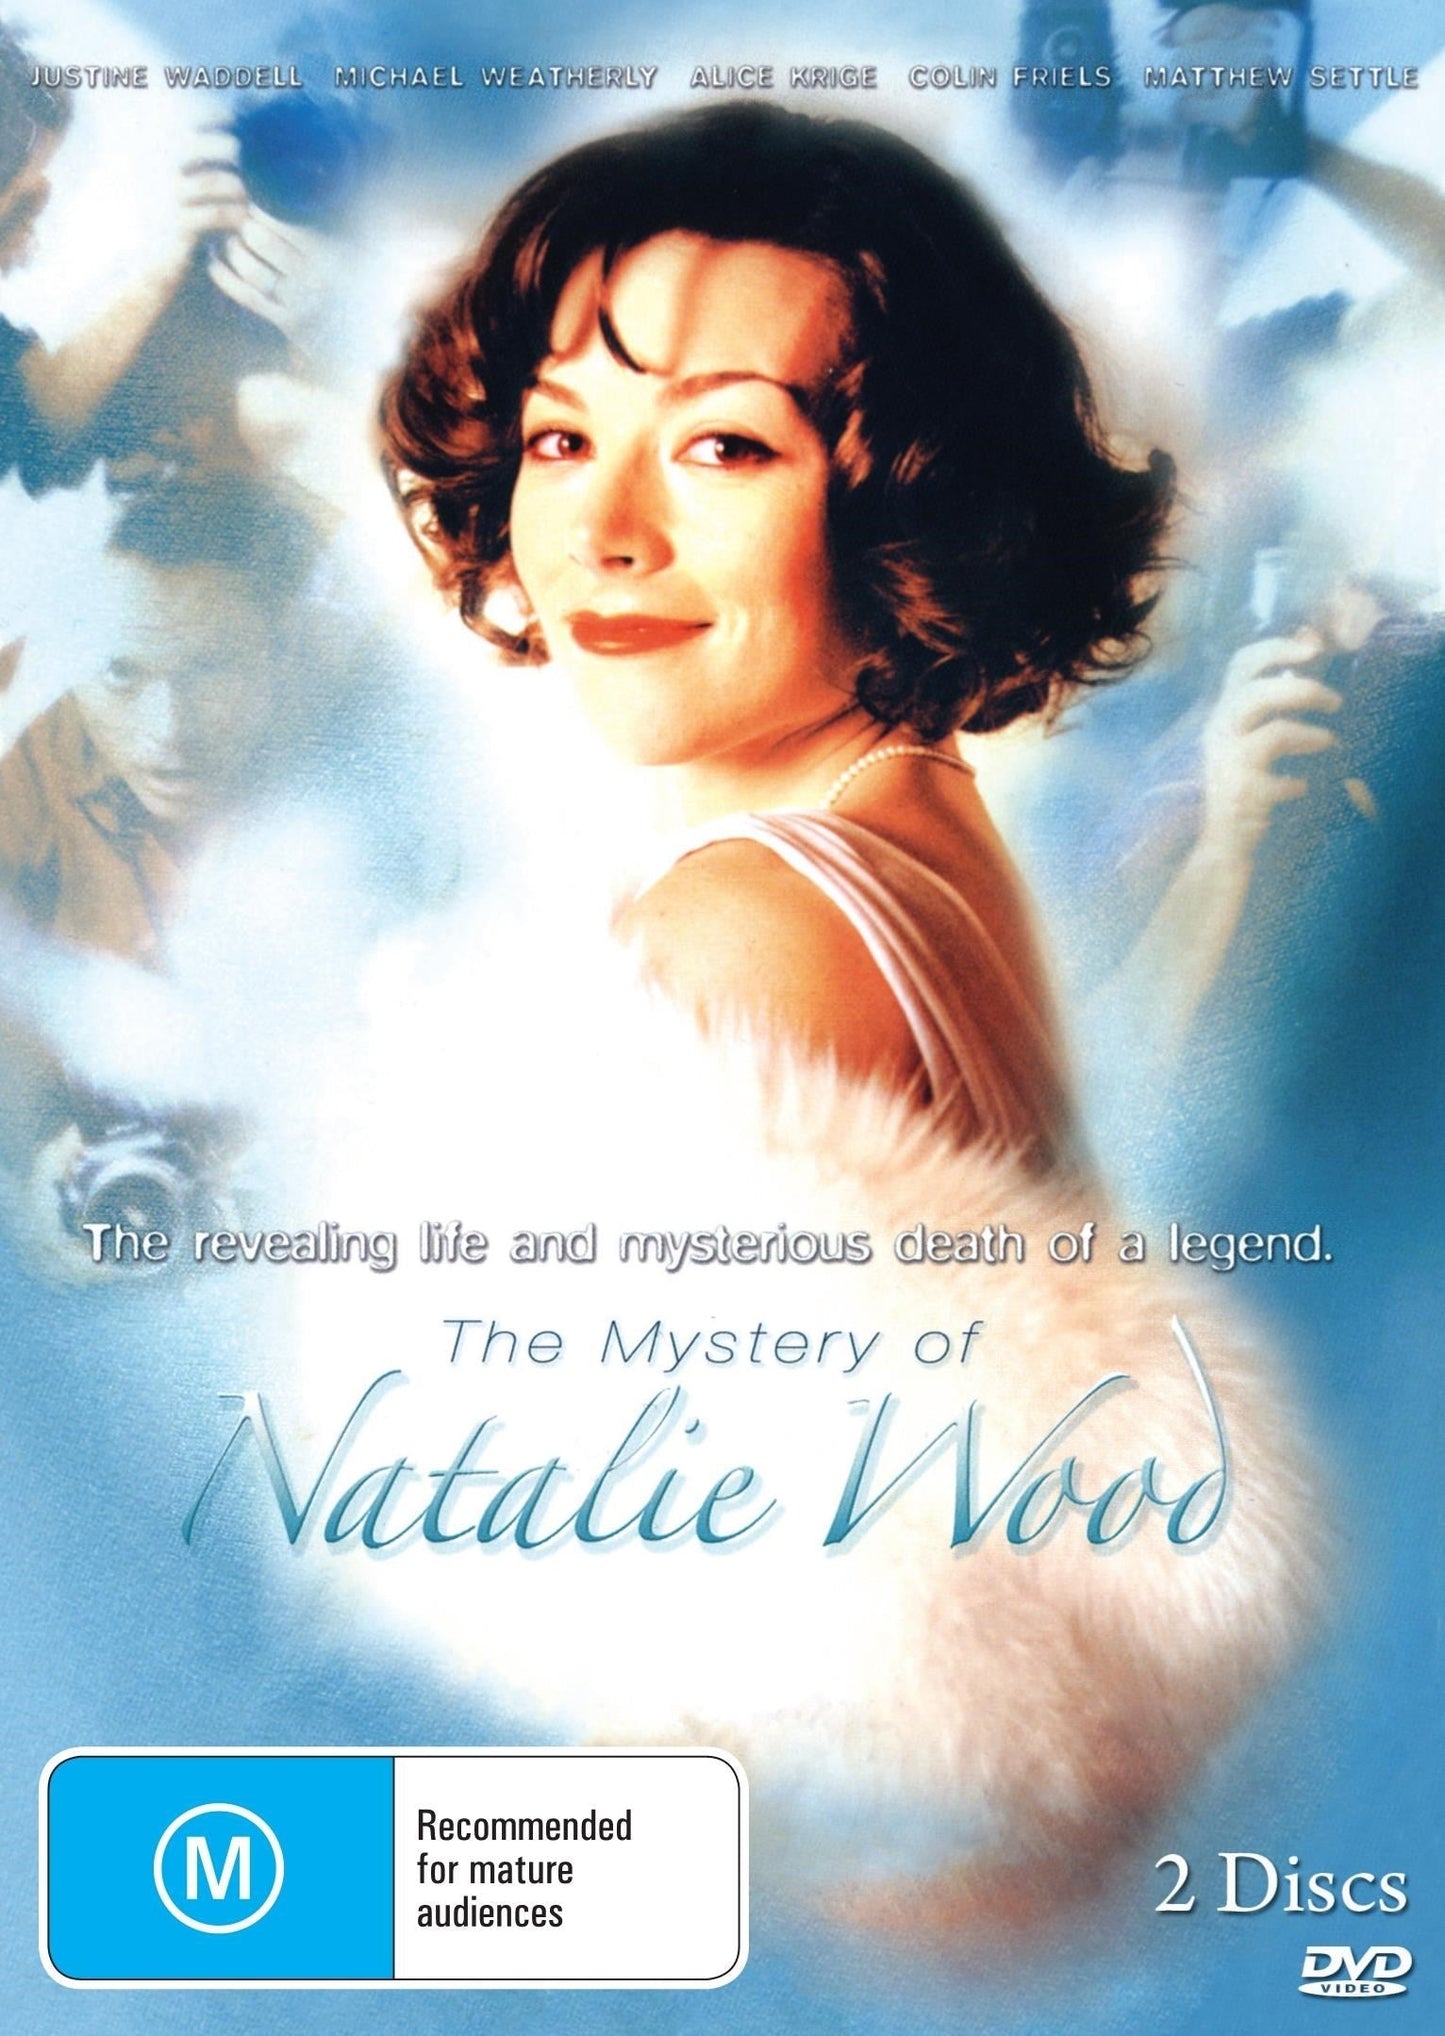 The Mystery of Natalie Wood rareandcollectibledvds